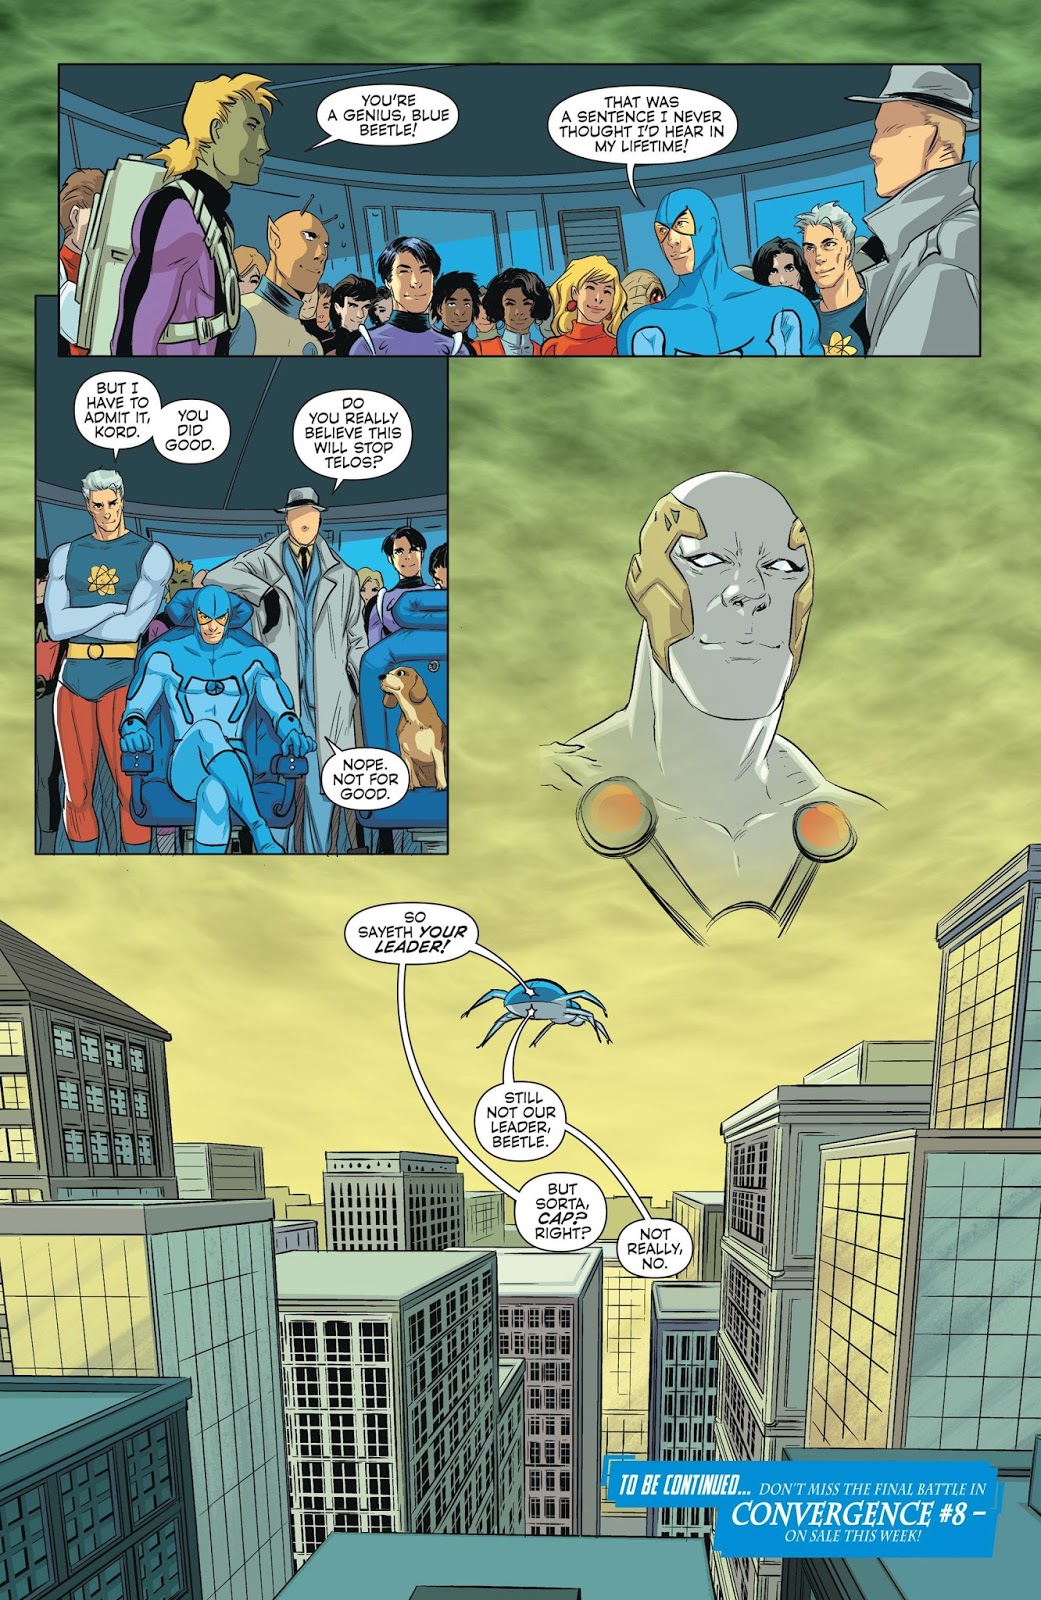 Weird Science DC Comics: Blue Beetle #2 Review and *SPOILERS*